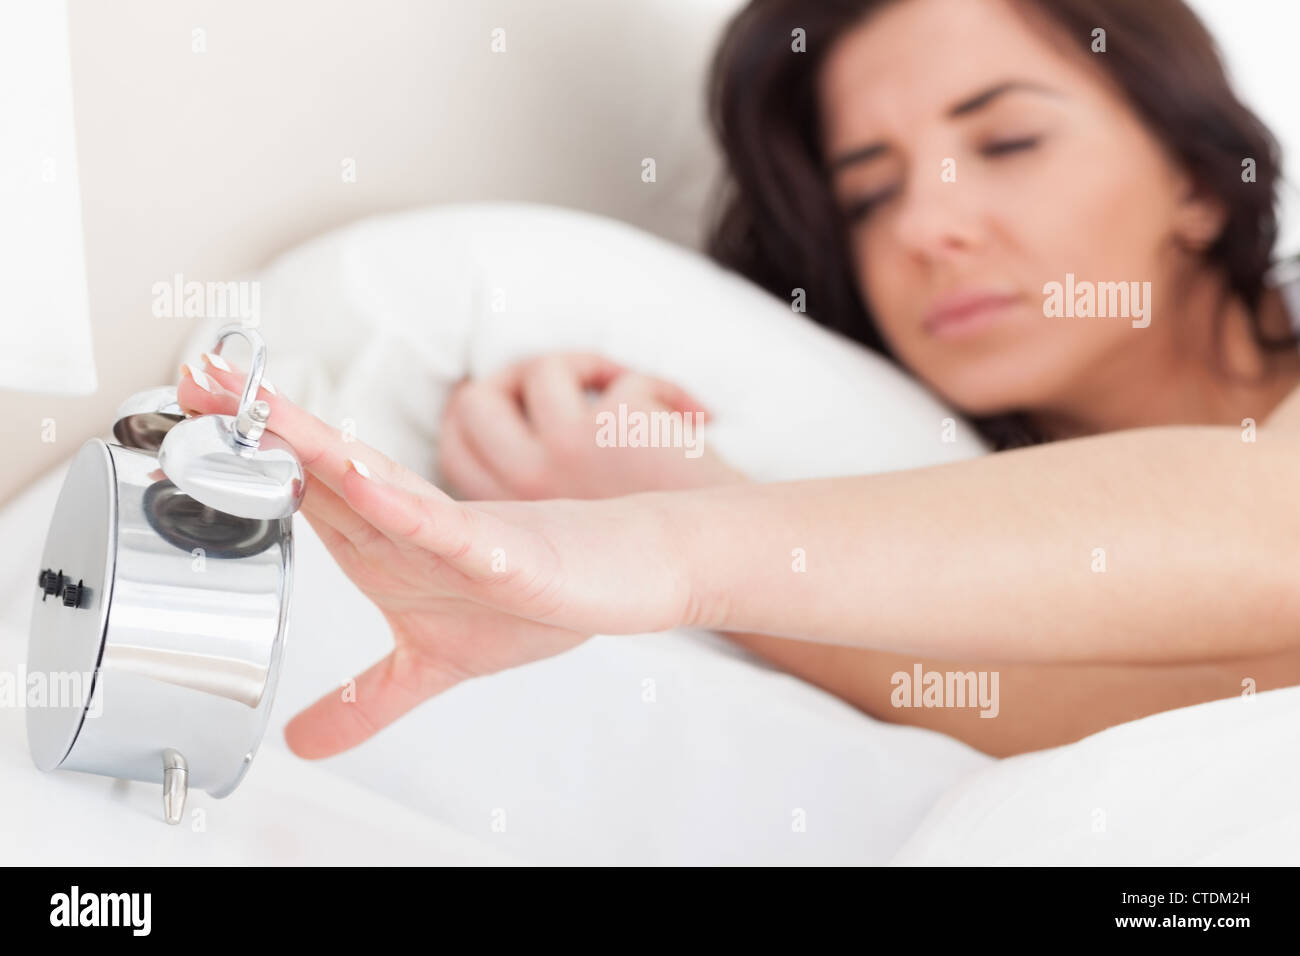 Brunette woman trying to turn off her alarm clock Stock Photo